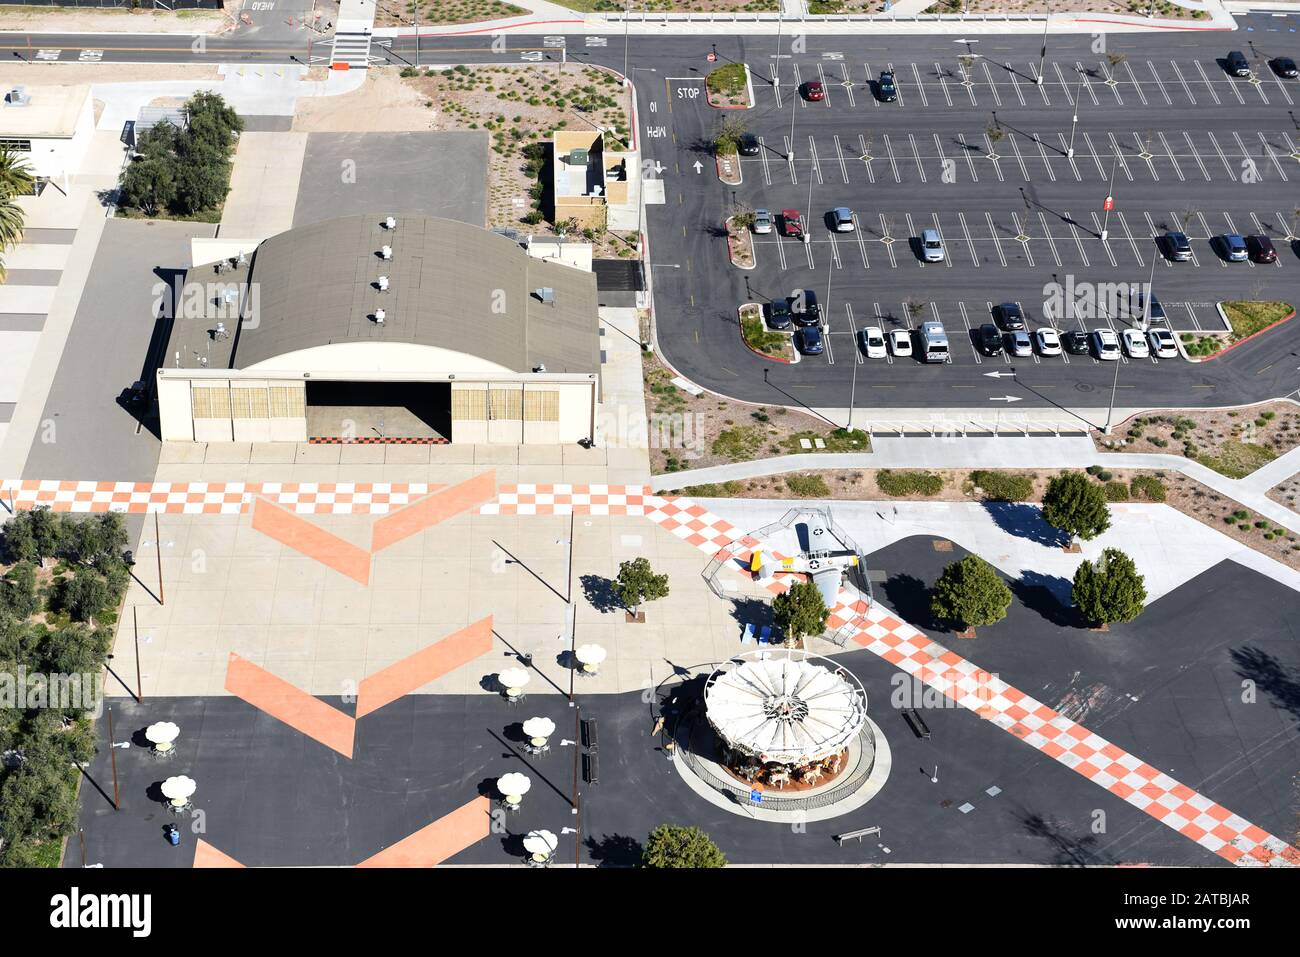 IRVINE, CALIFORNIA - 31 JAN 2020: Aerial View of the Hangar and Carousel at the Orange County Great Park. Stock Photo